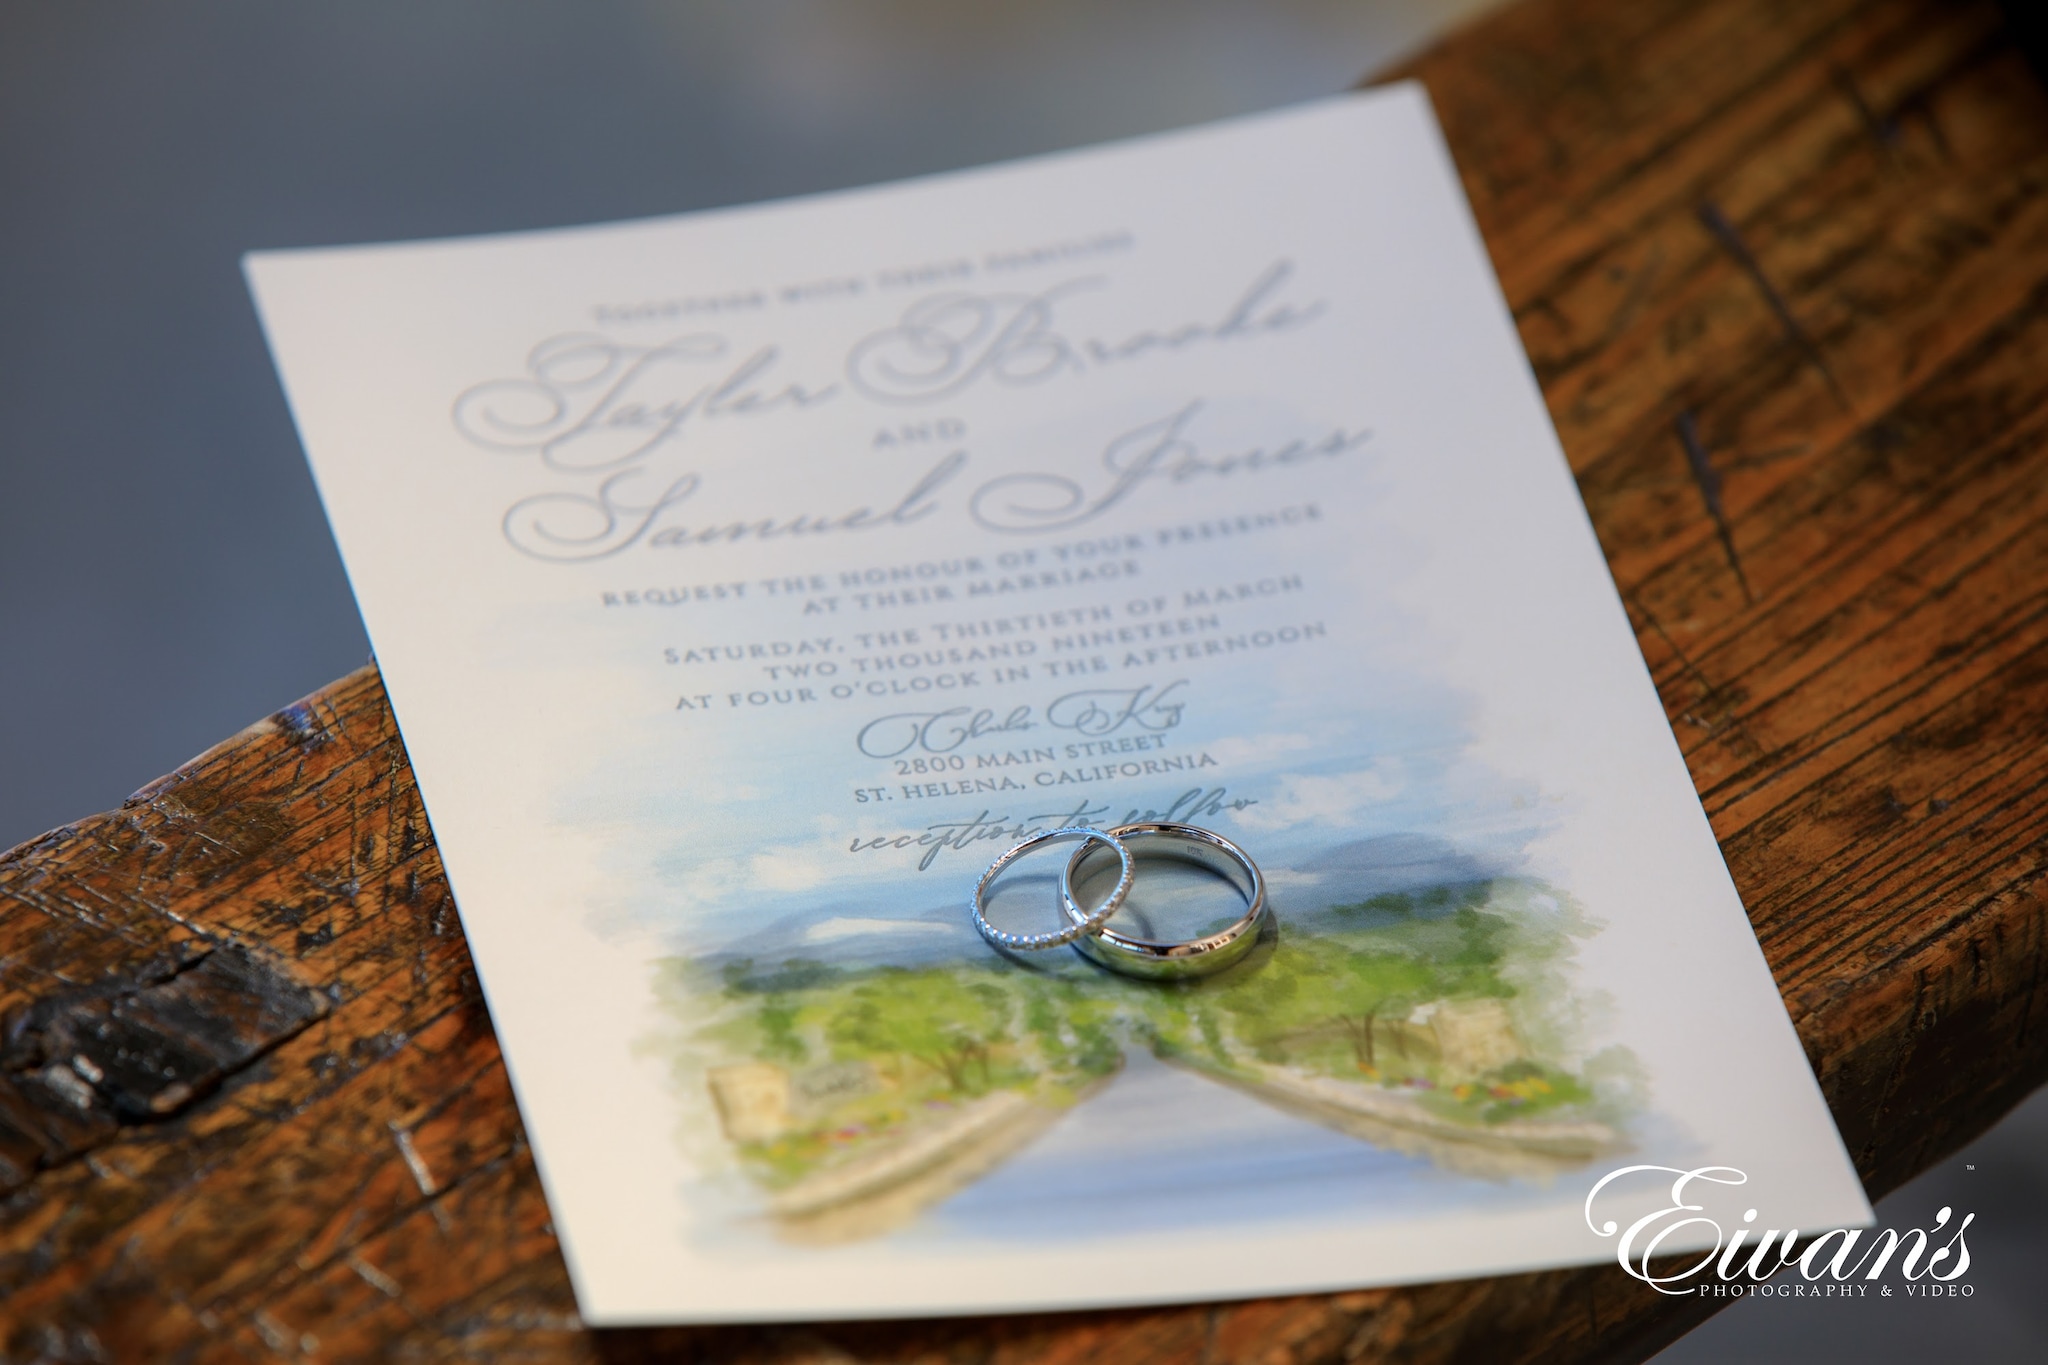 Save The Date Cards - Why, What, And How | Eivan's Photo & Video